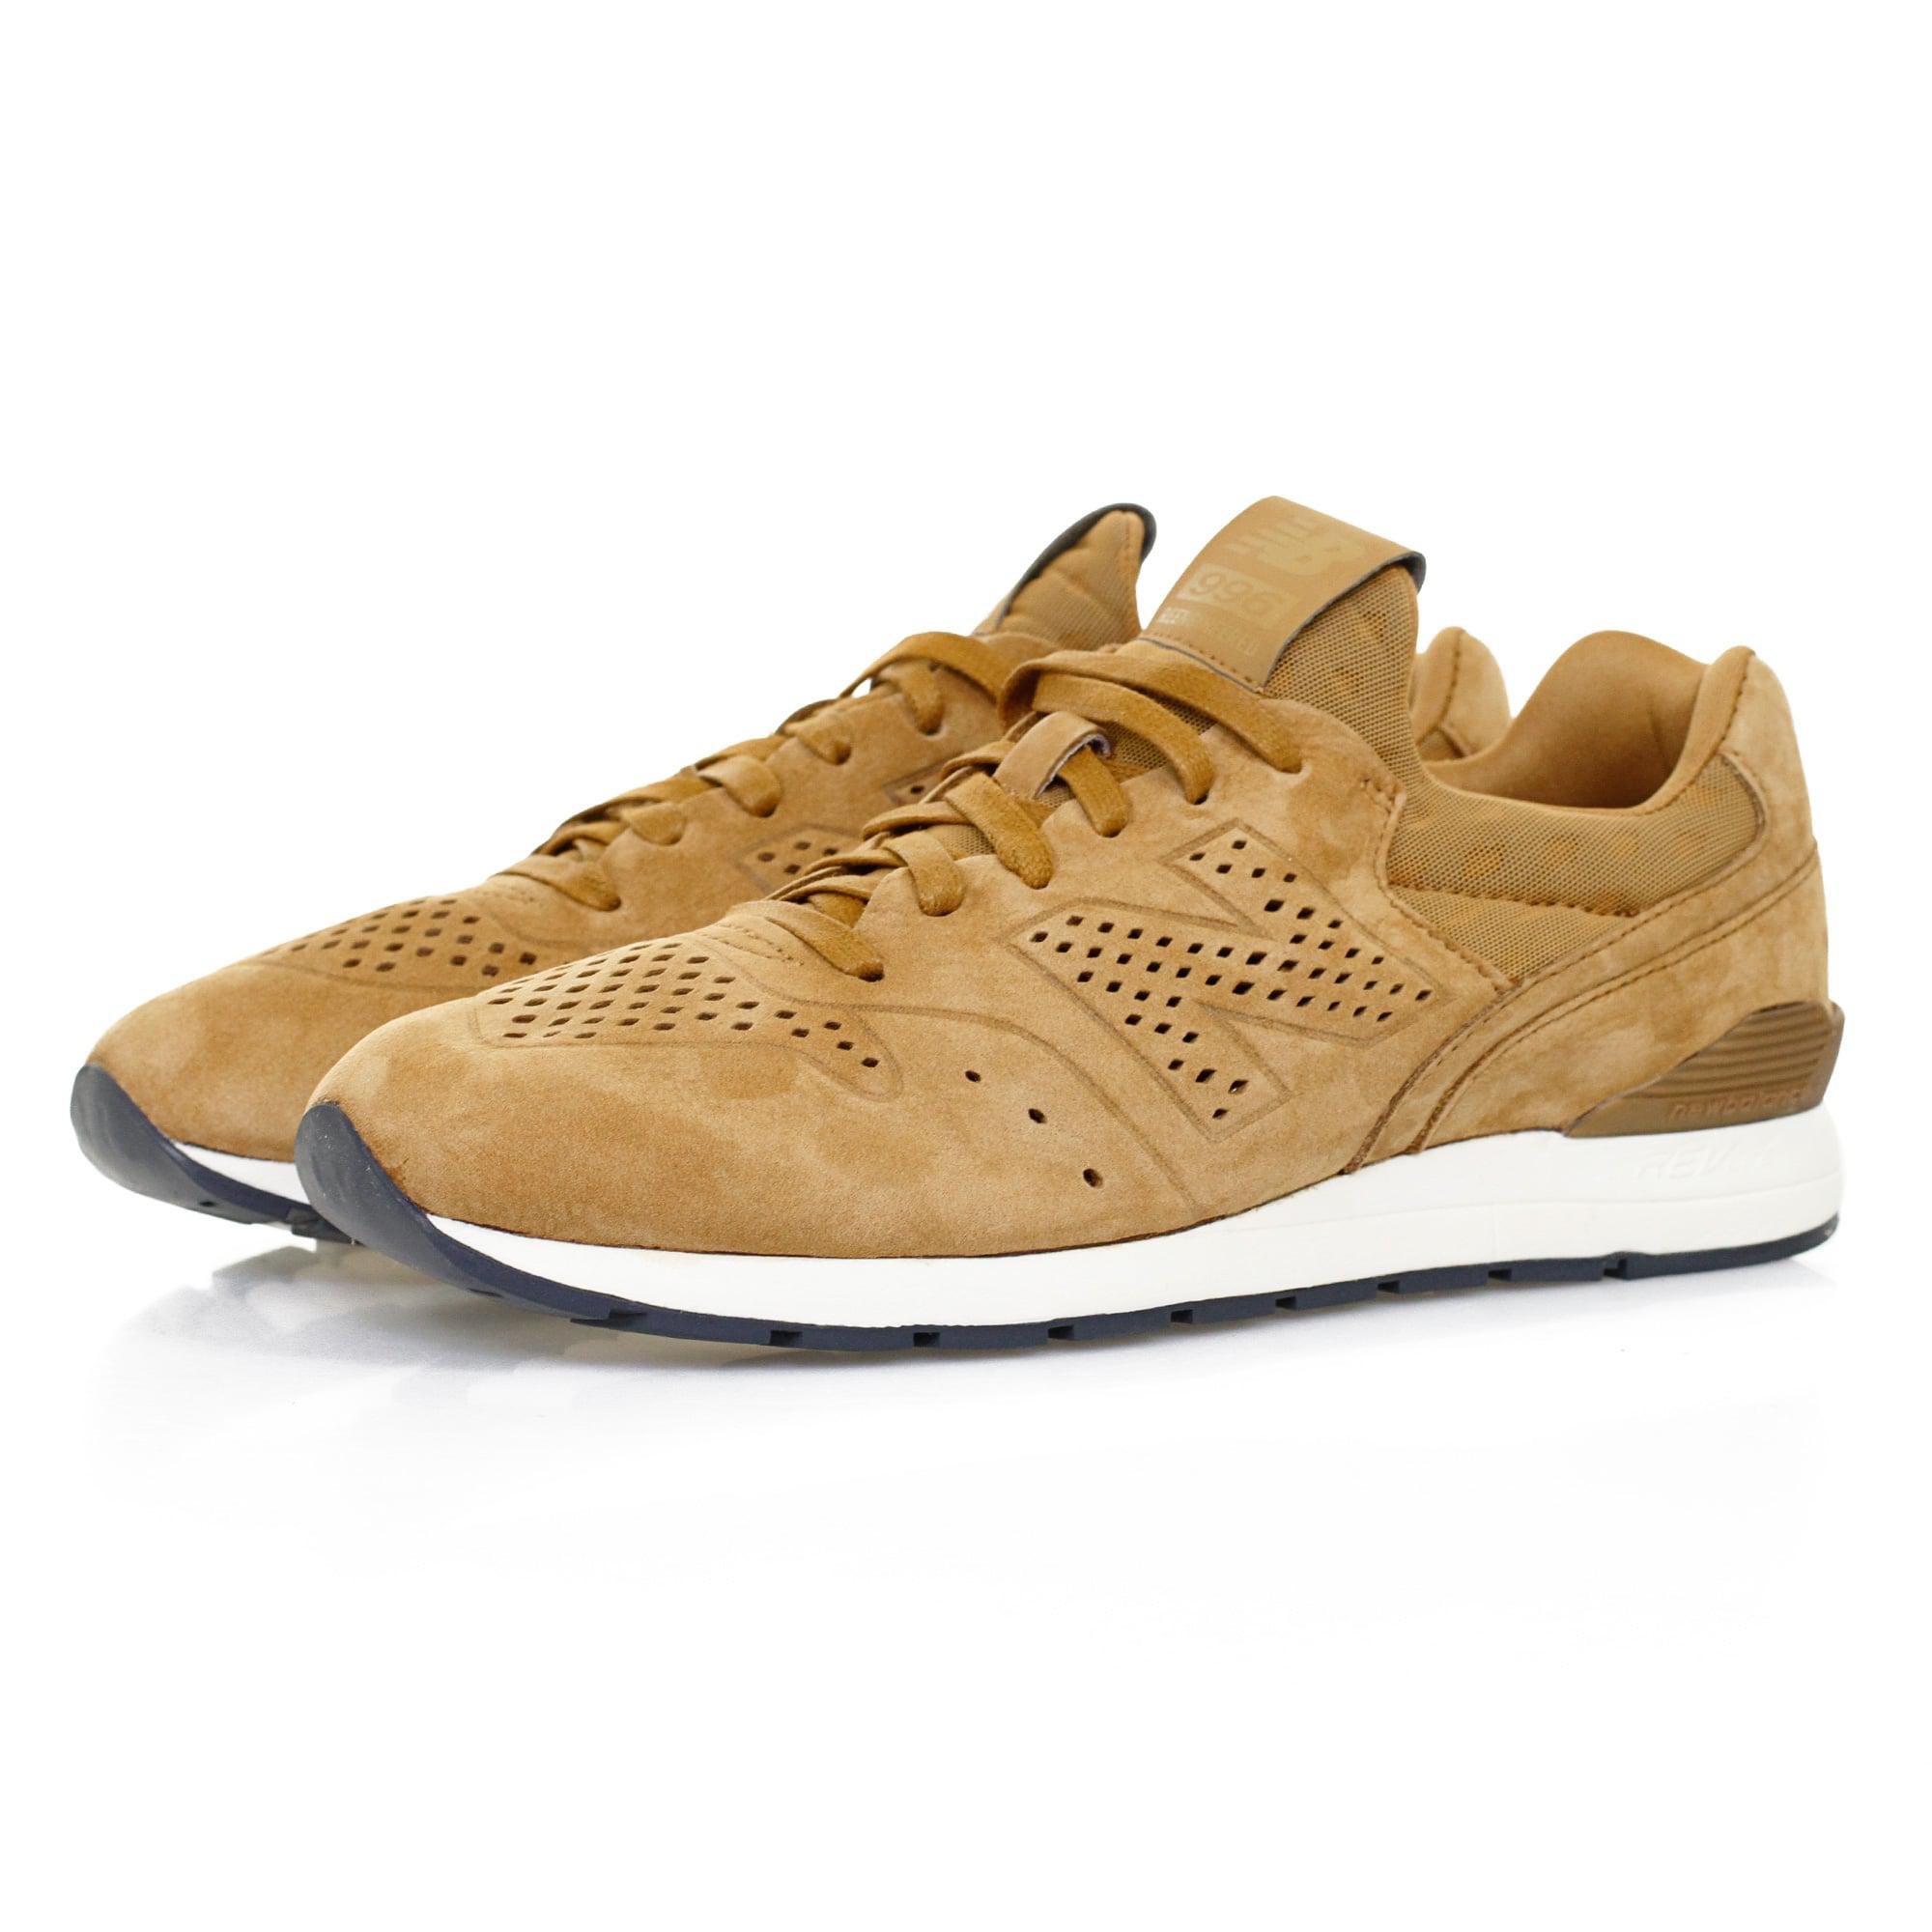 New Balance Reengineered 996 Camel Shoe in Natural for Men - Lyst